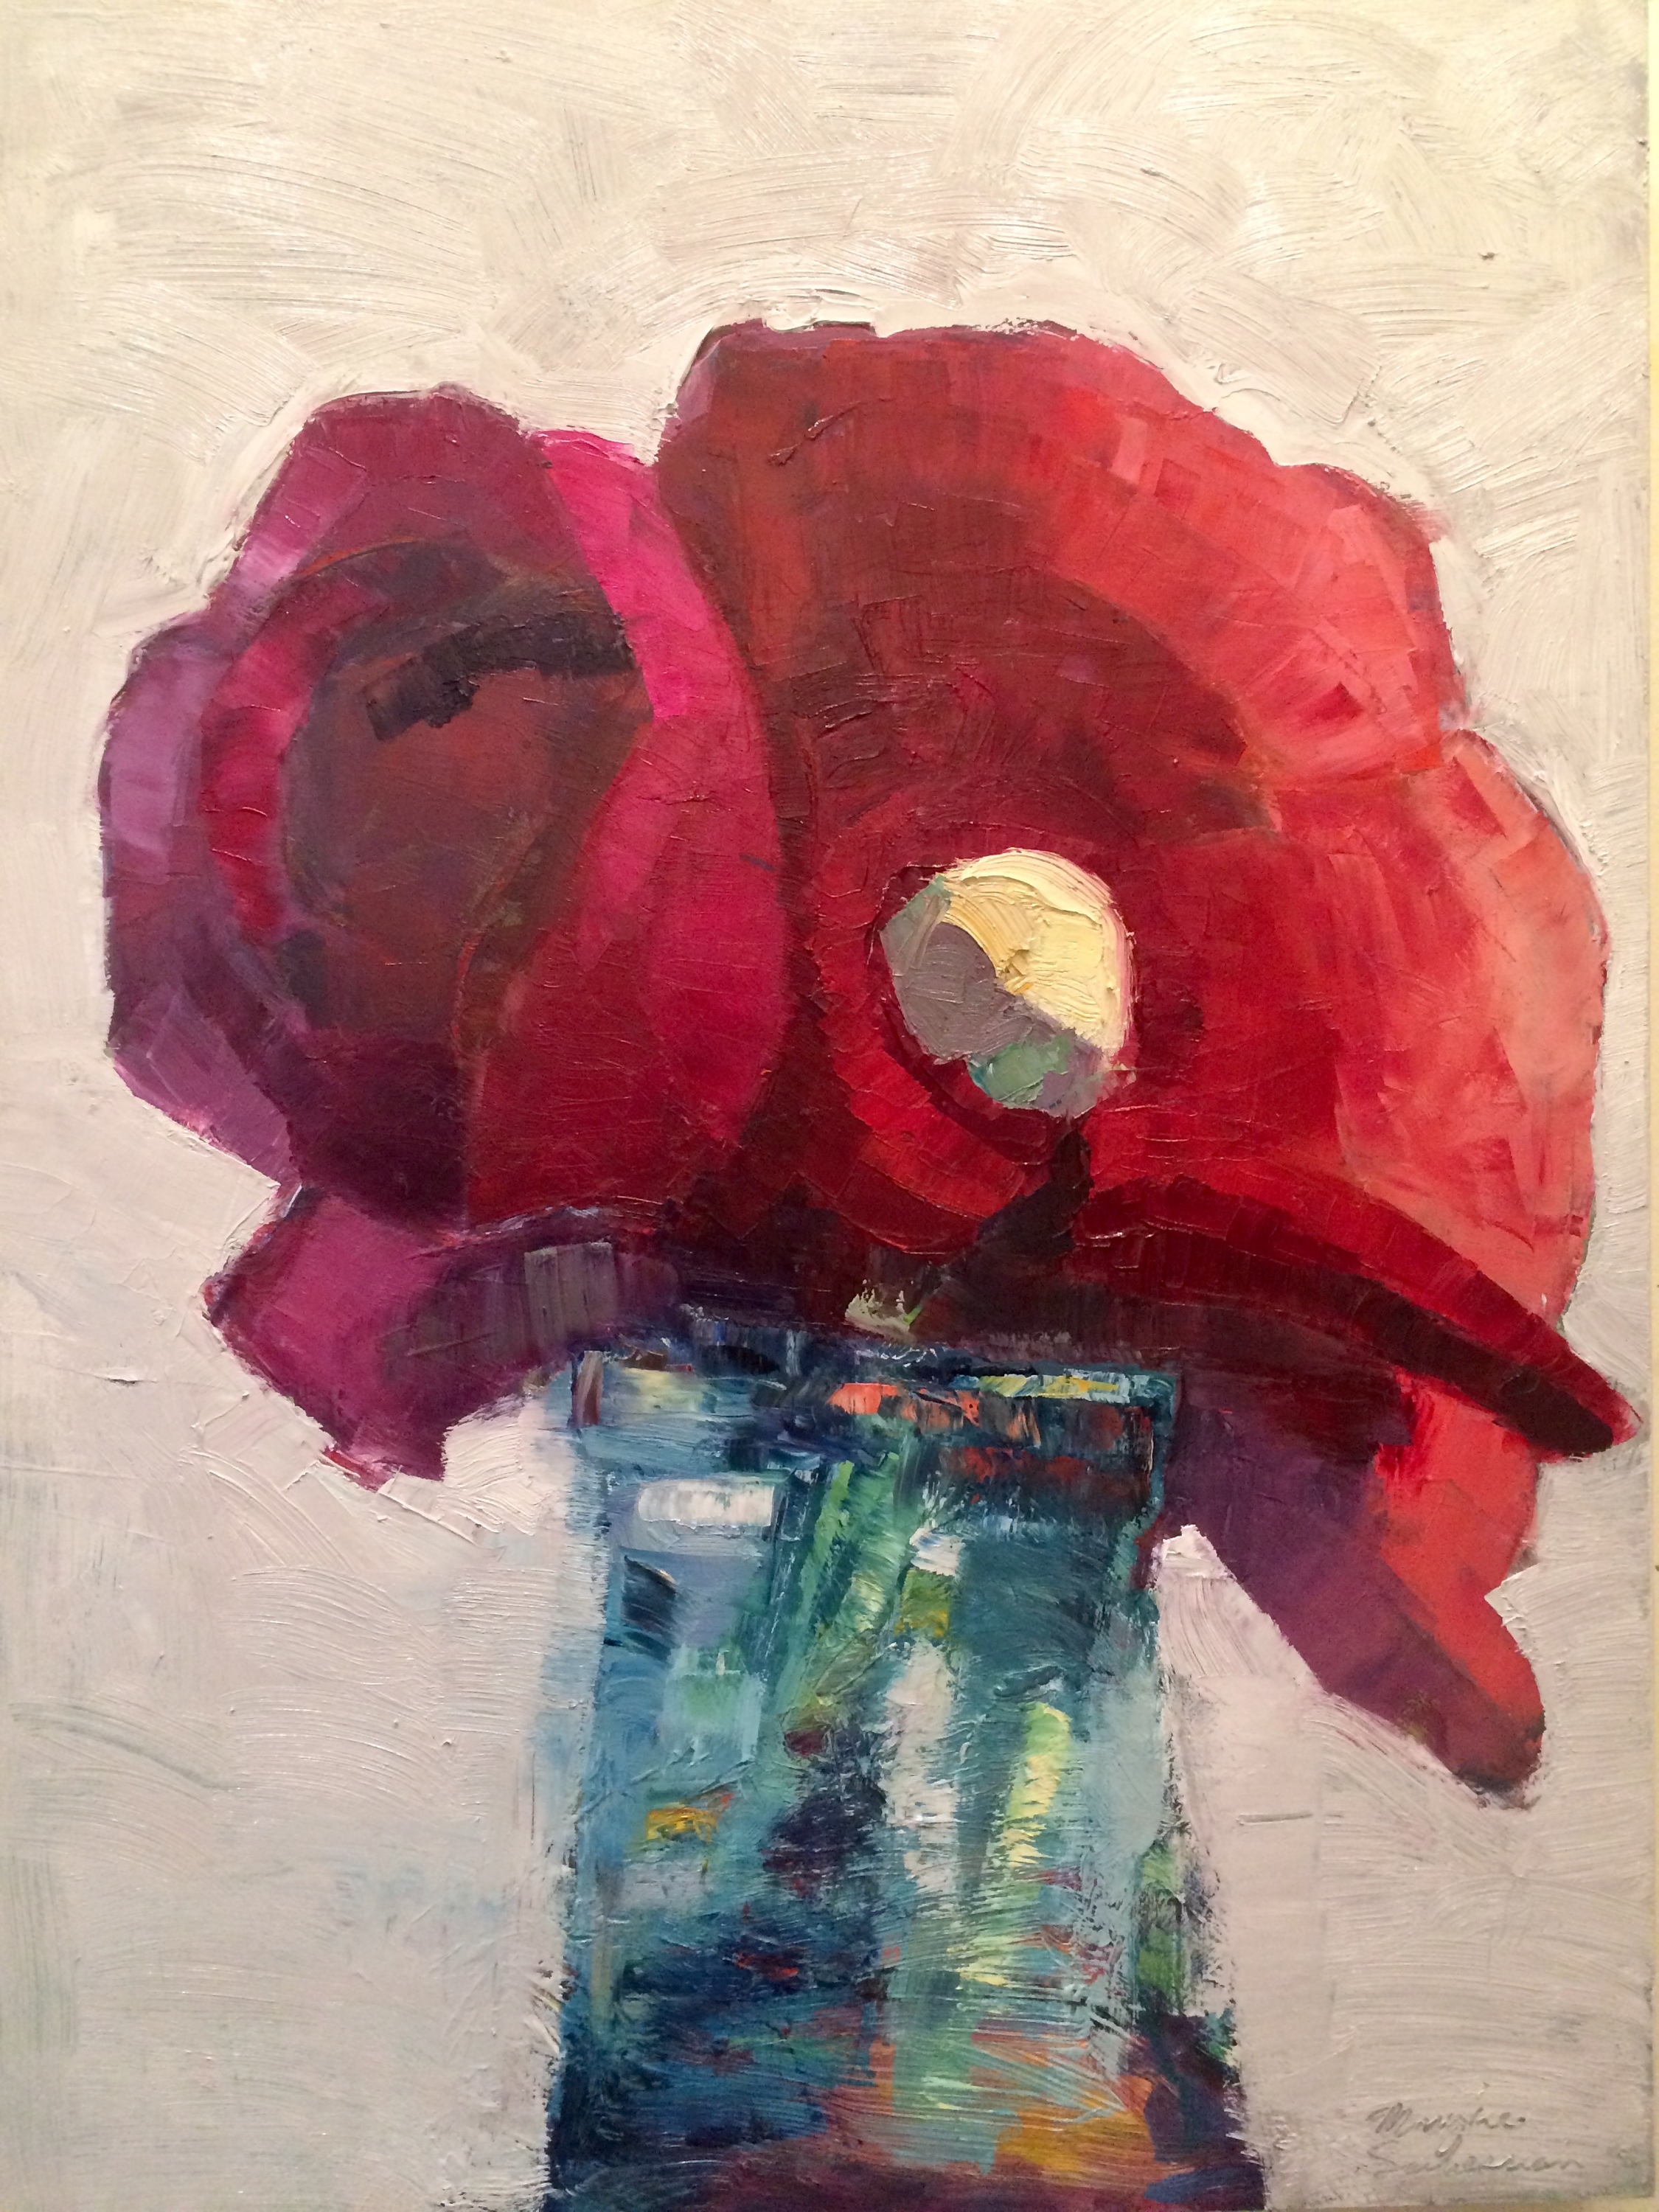 Together still life with red pink ranunculus and bud enfolded oil and mixed media on wood 24x18 zfijzg